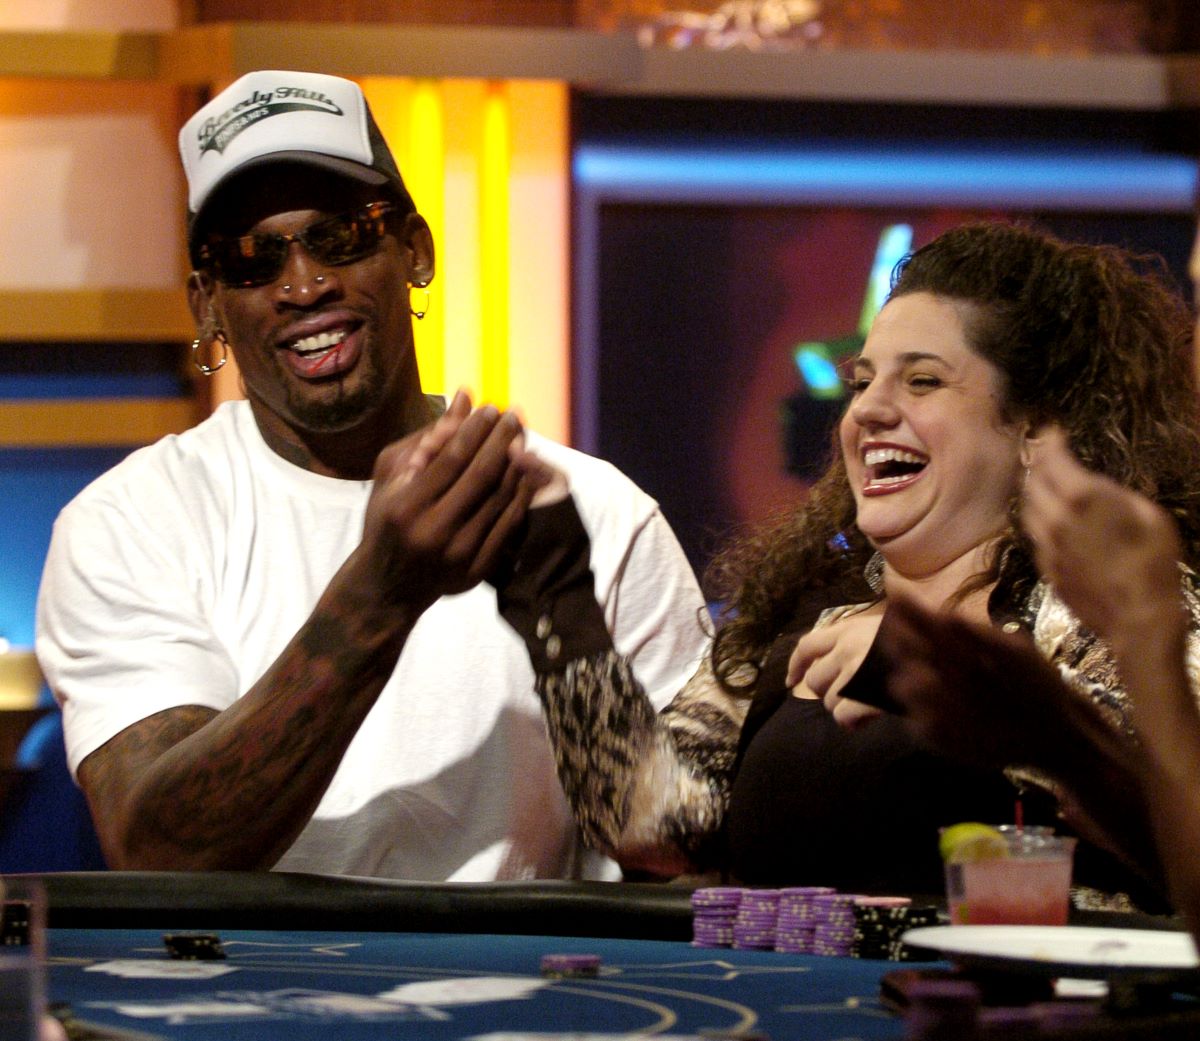 Dennis Rodman Won $89,000 Gambling in Las Vegas Once but Lost $200,000 the Following Weekend: ‘Part of the $200,000 He Lost Was the $89,000 He Had Won the Week Before’